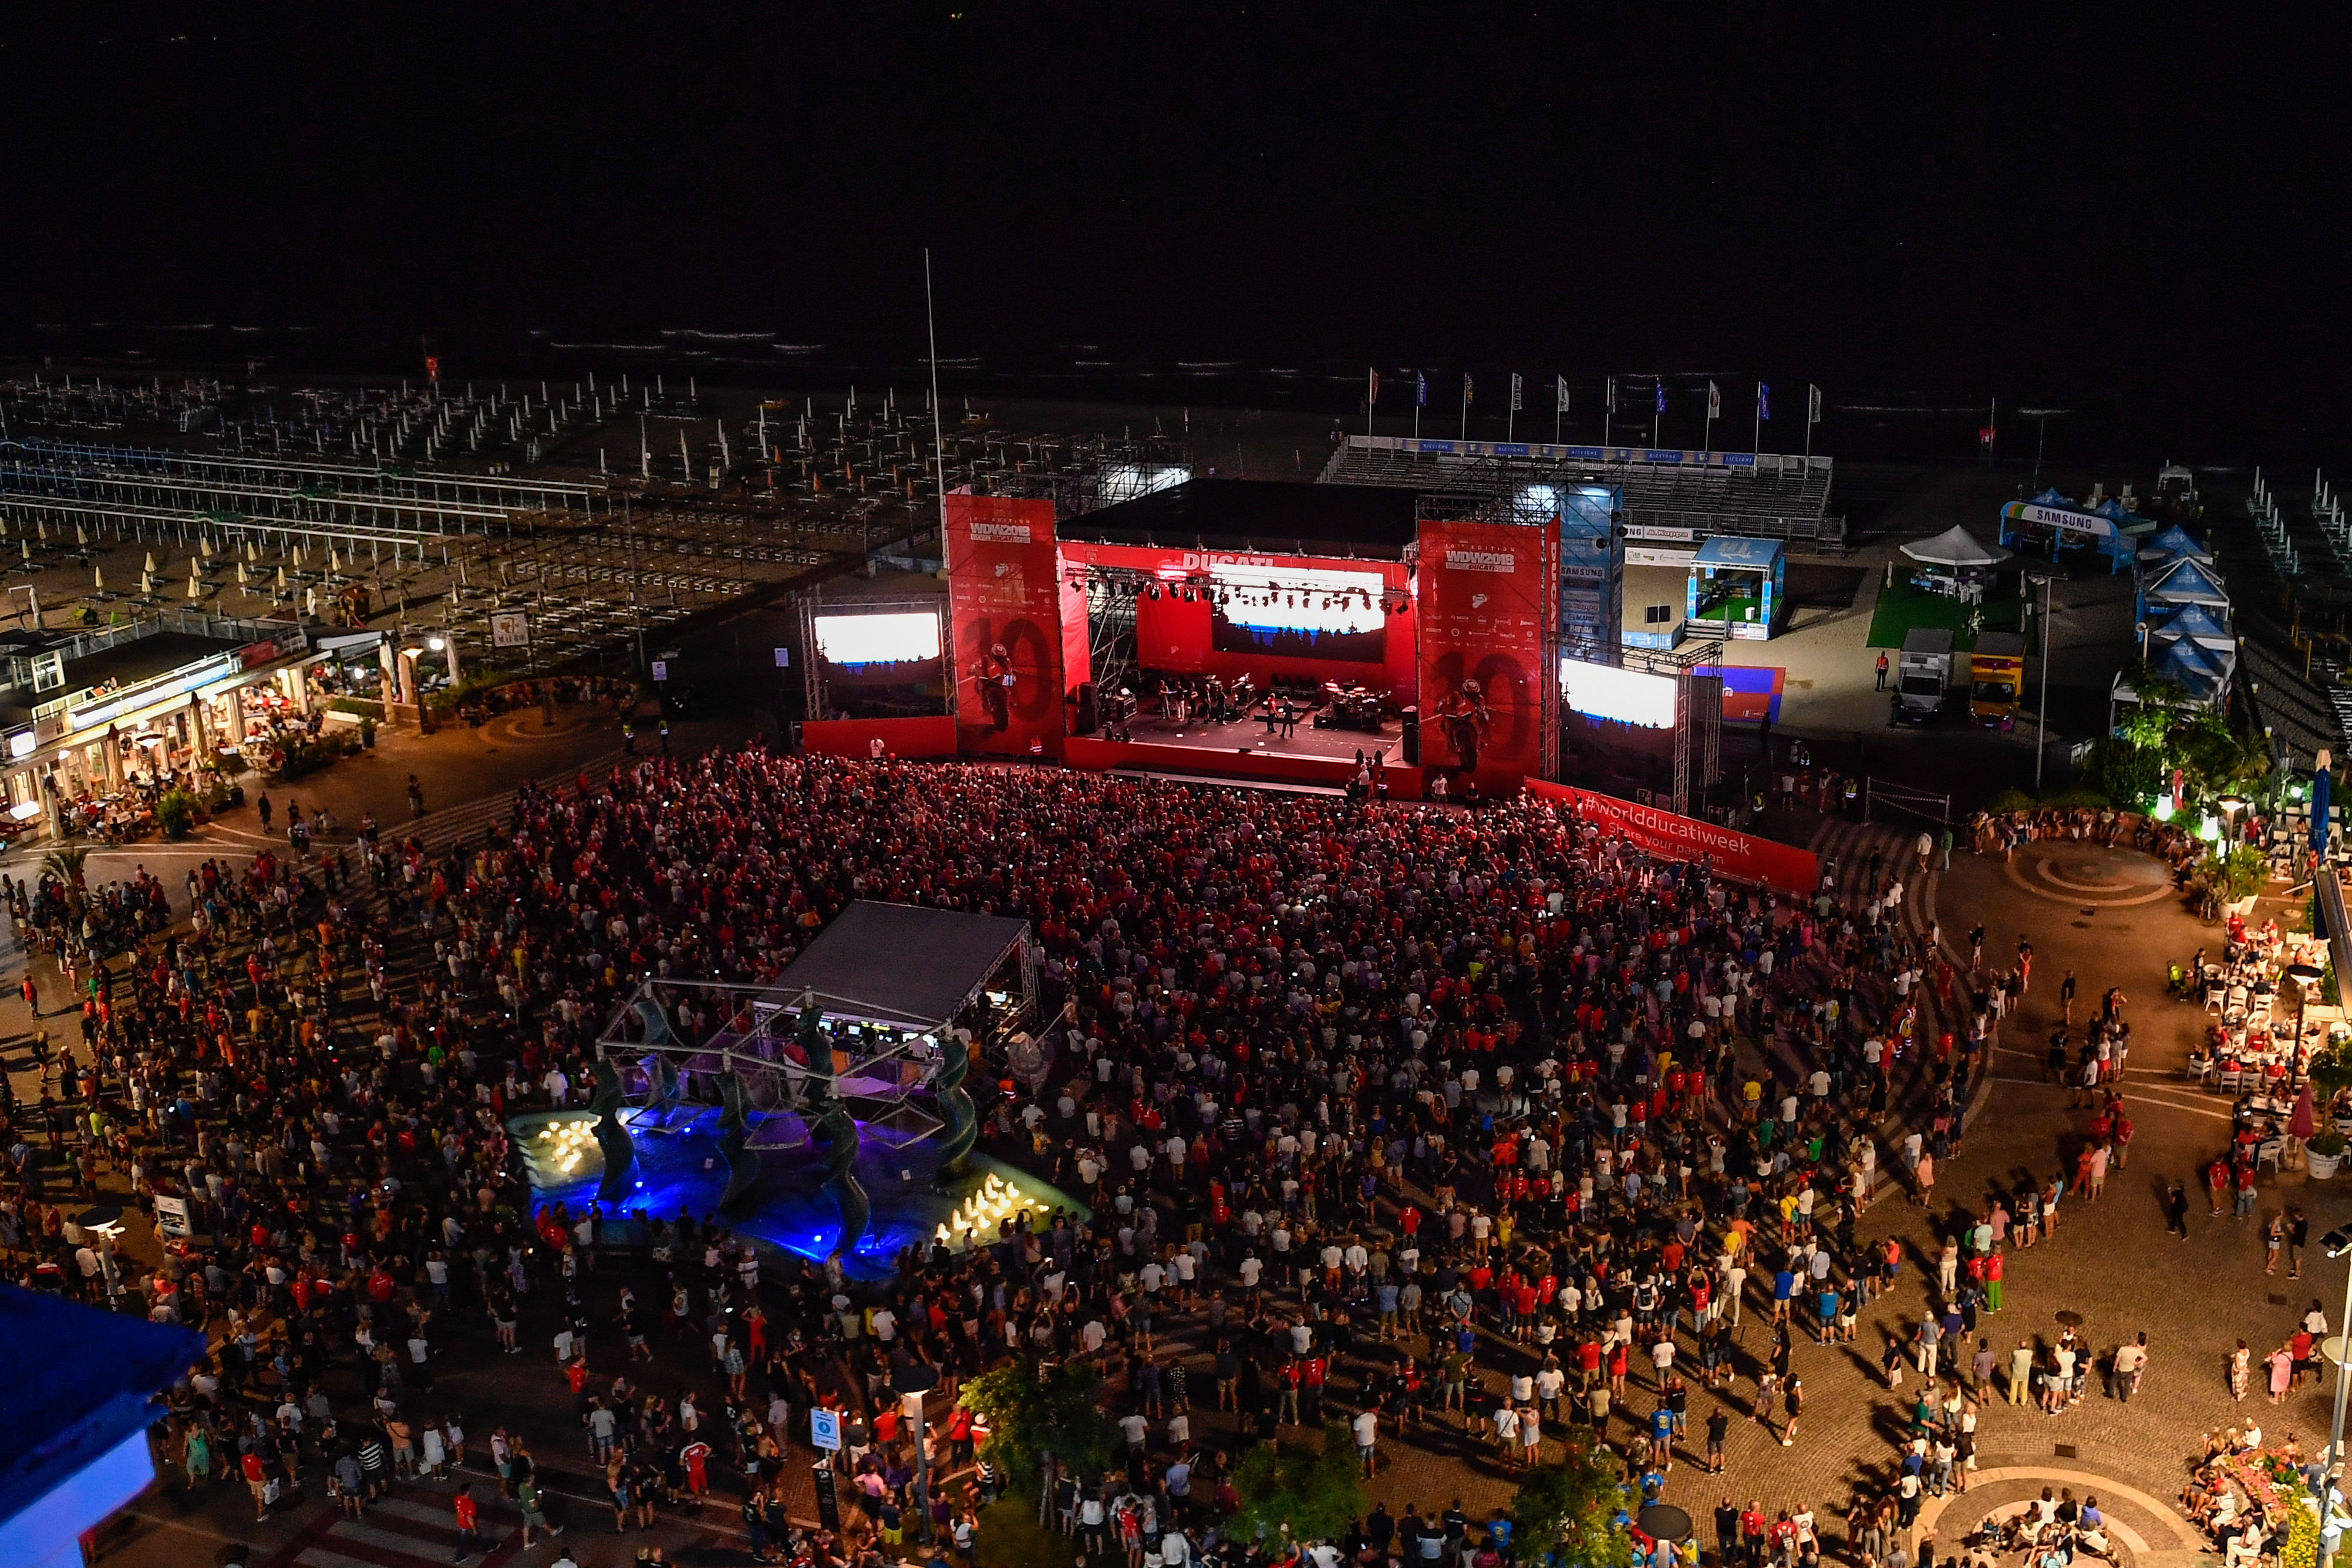 World Ducati Week 2018 Concert - Sound of Passion Night